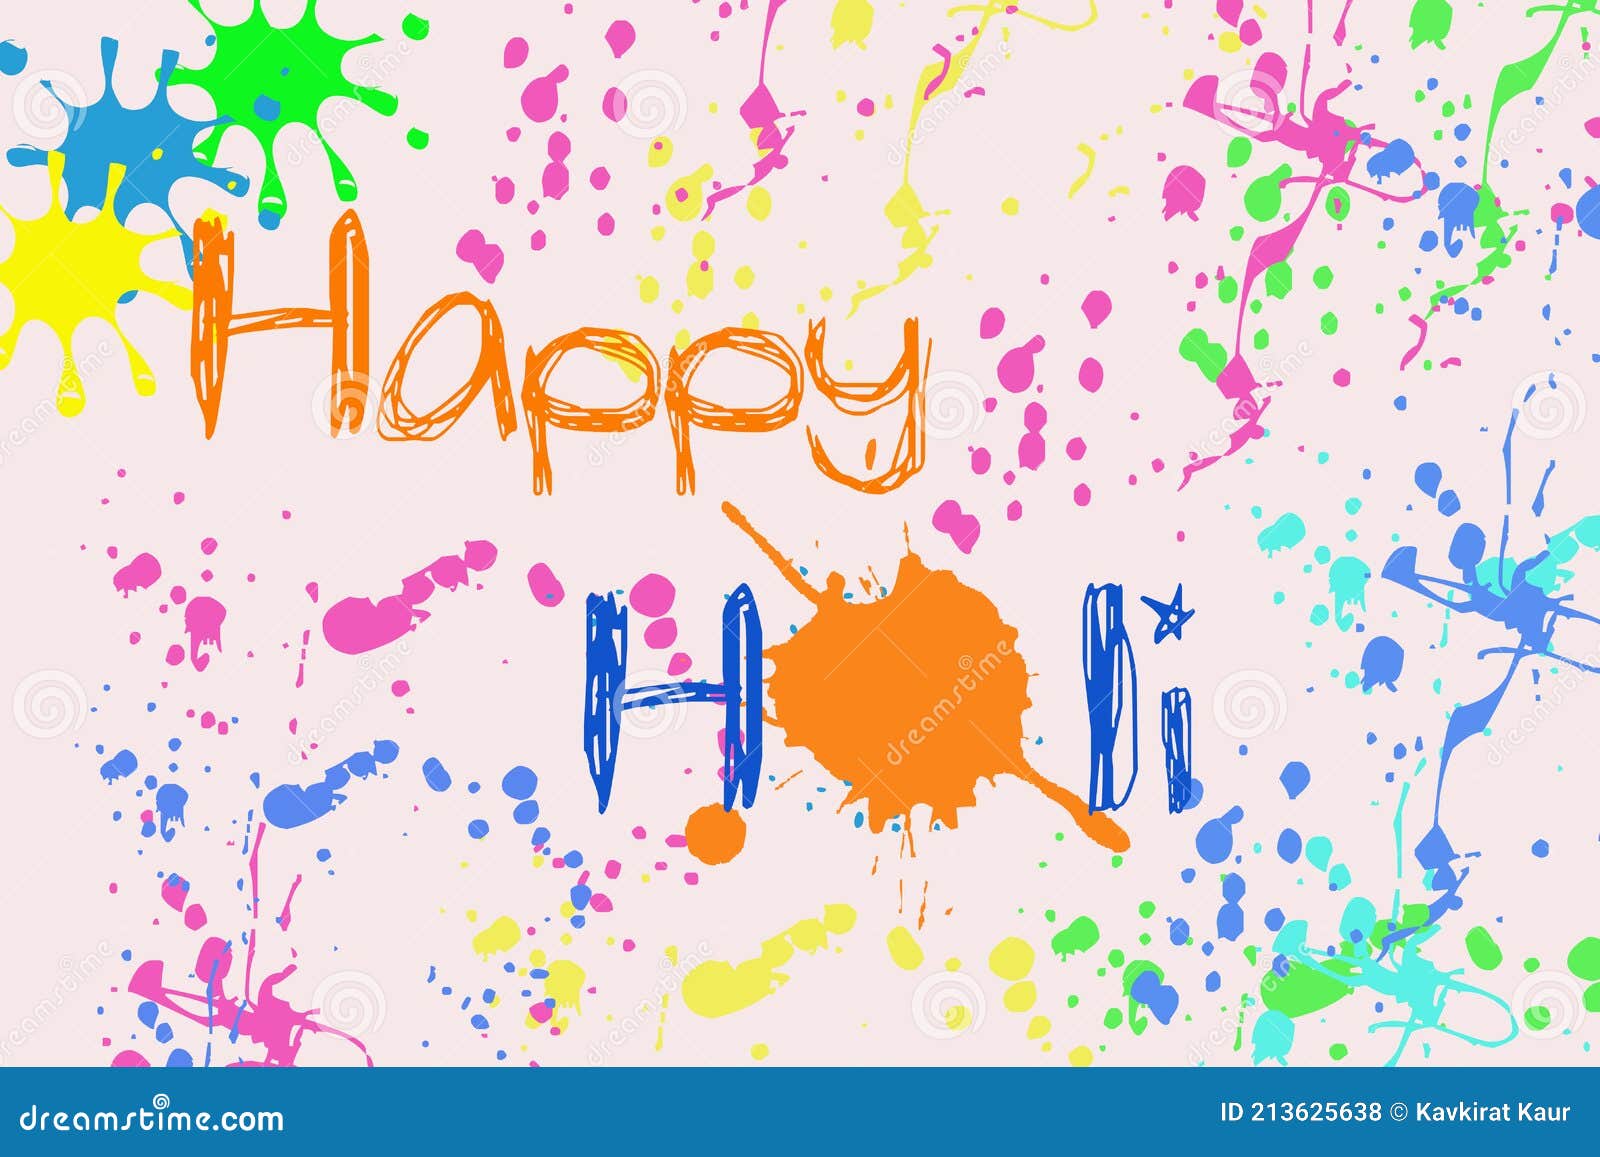 Illustration of Happy Holi on Abstract Watercolour Background with Splashes  Stock Illustration - Illustration of creative, color: 213625638